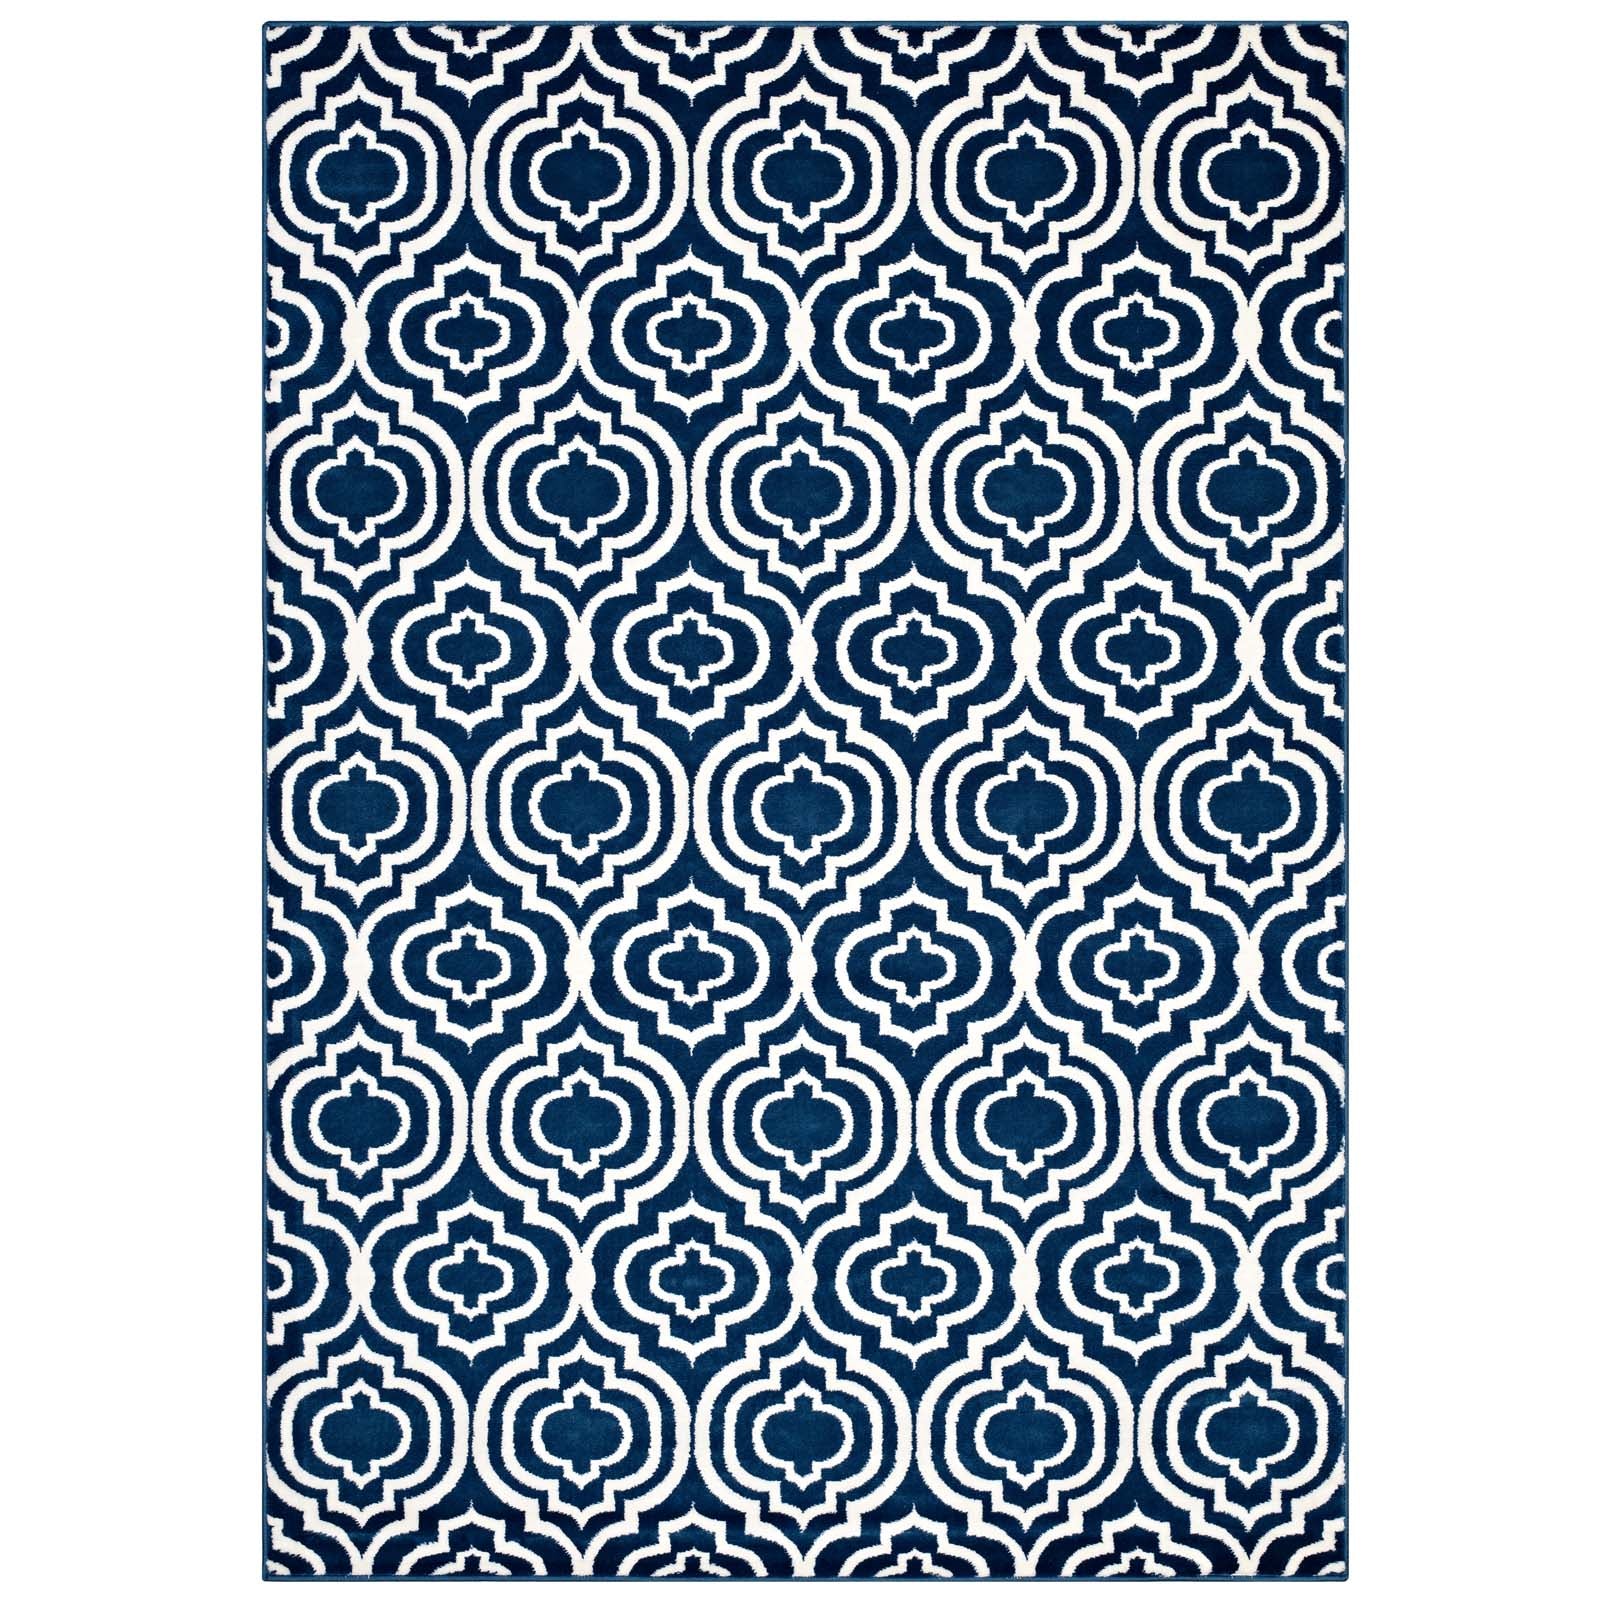 Modway Indoor Rugs - Frame Transitional Moroccan Trellis 5x8 Area Rug Morcoccan Blue & Ivory